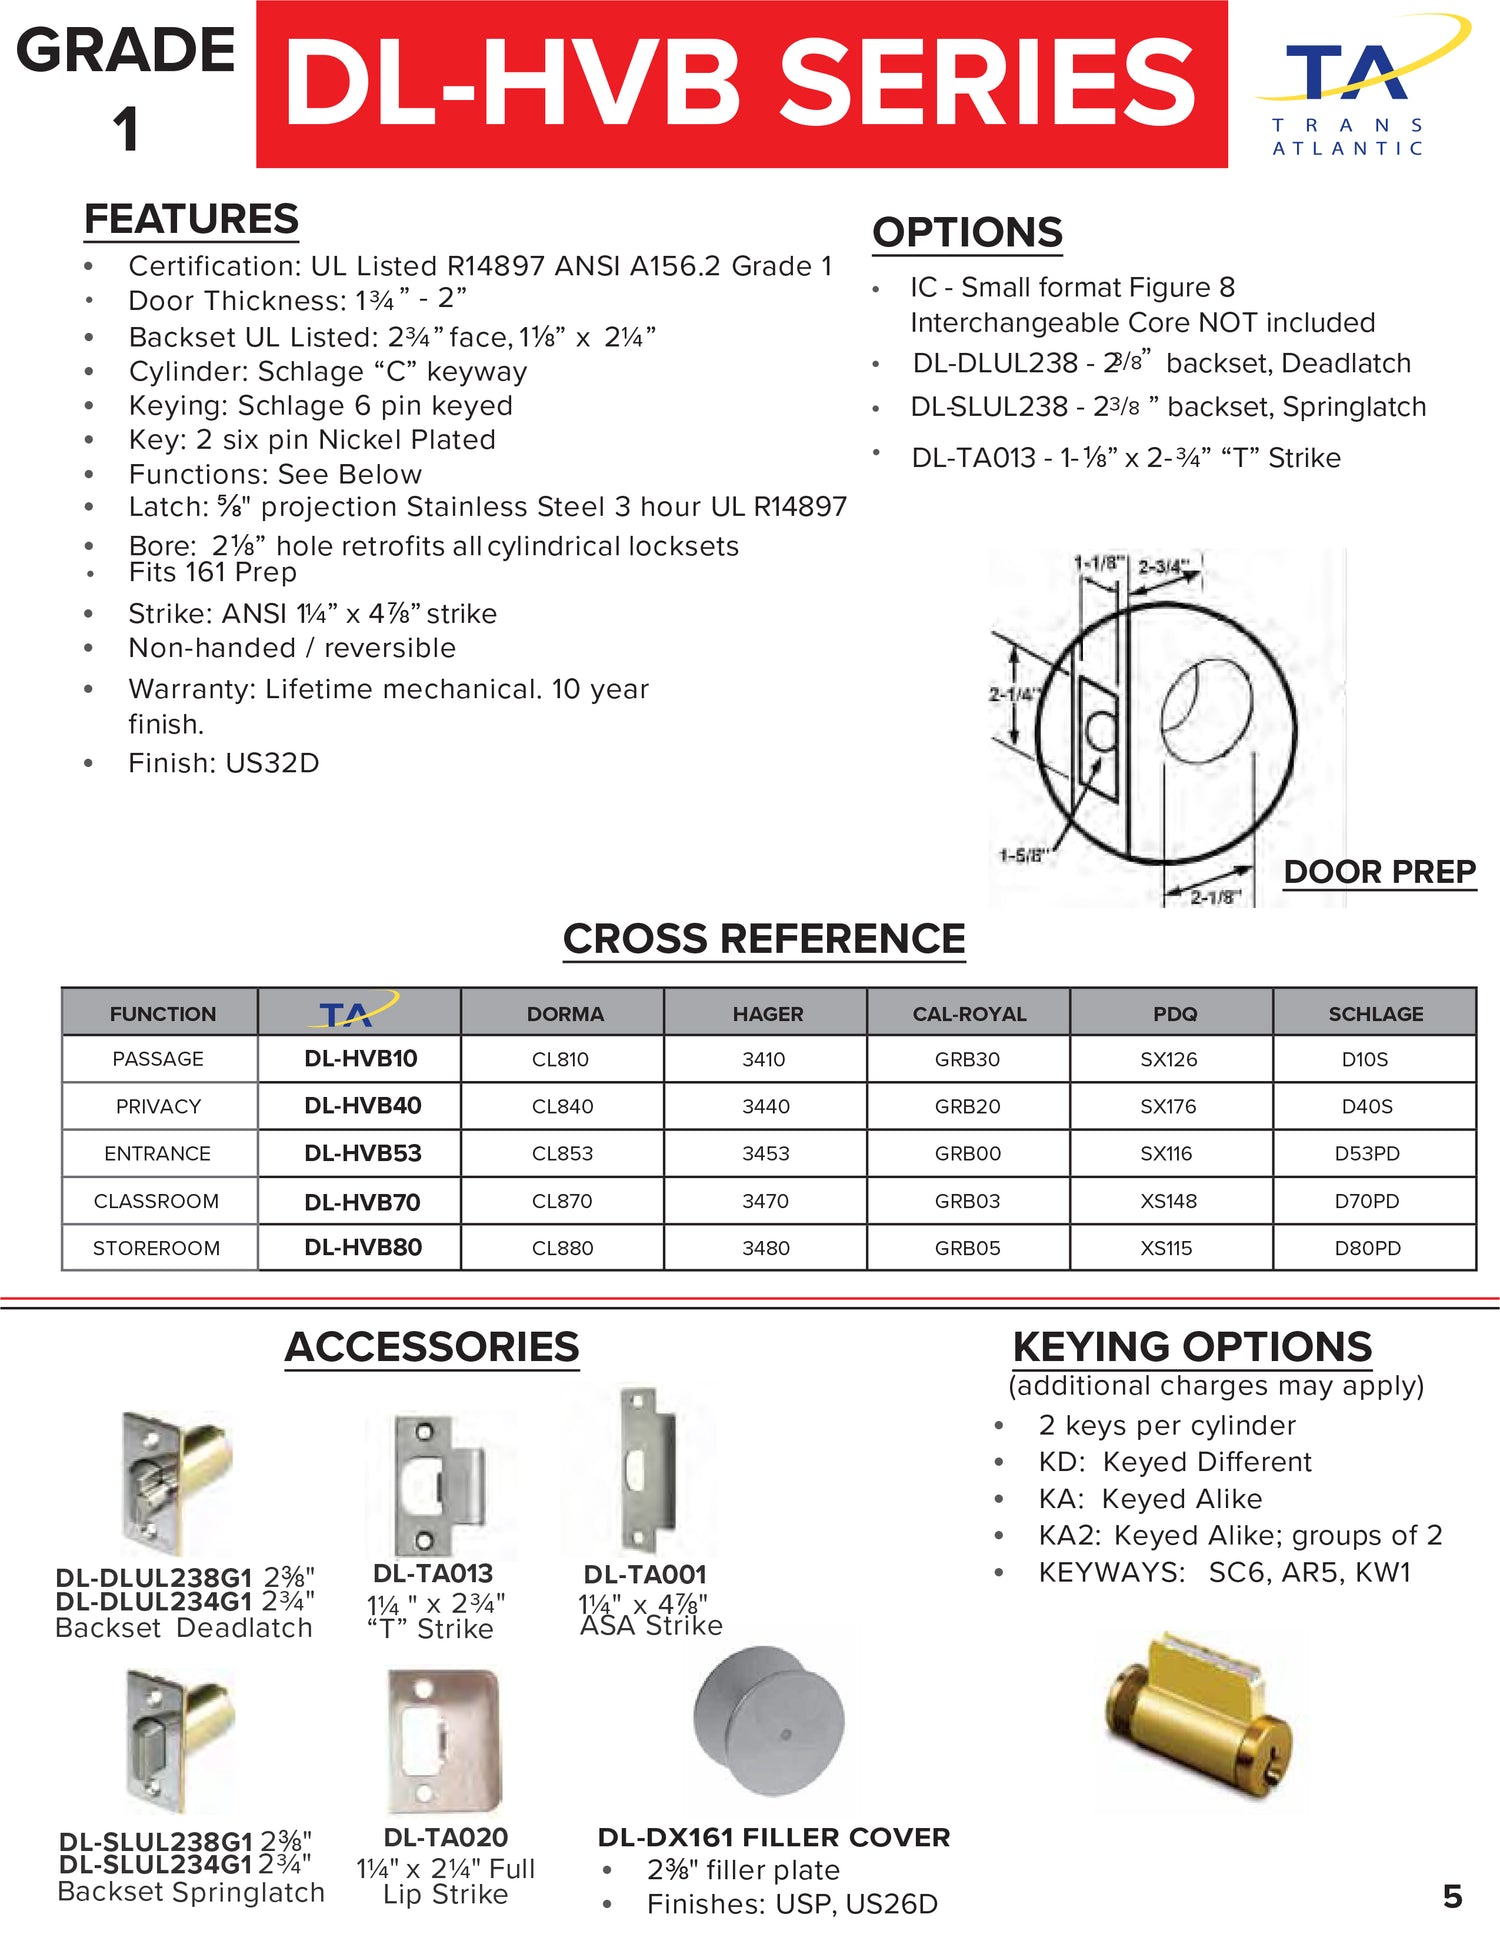 Heavy-Duty Stainless-Steel Grade 1 Commercial Storeroom Knobset with Lock and IC Core -  Pro-Edge HD